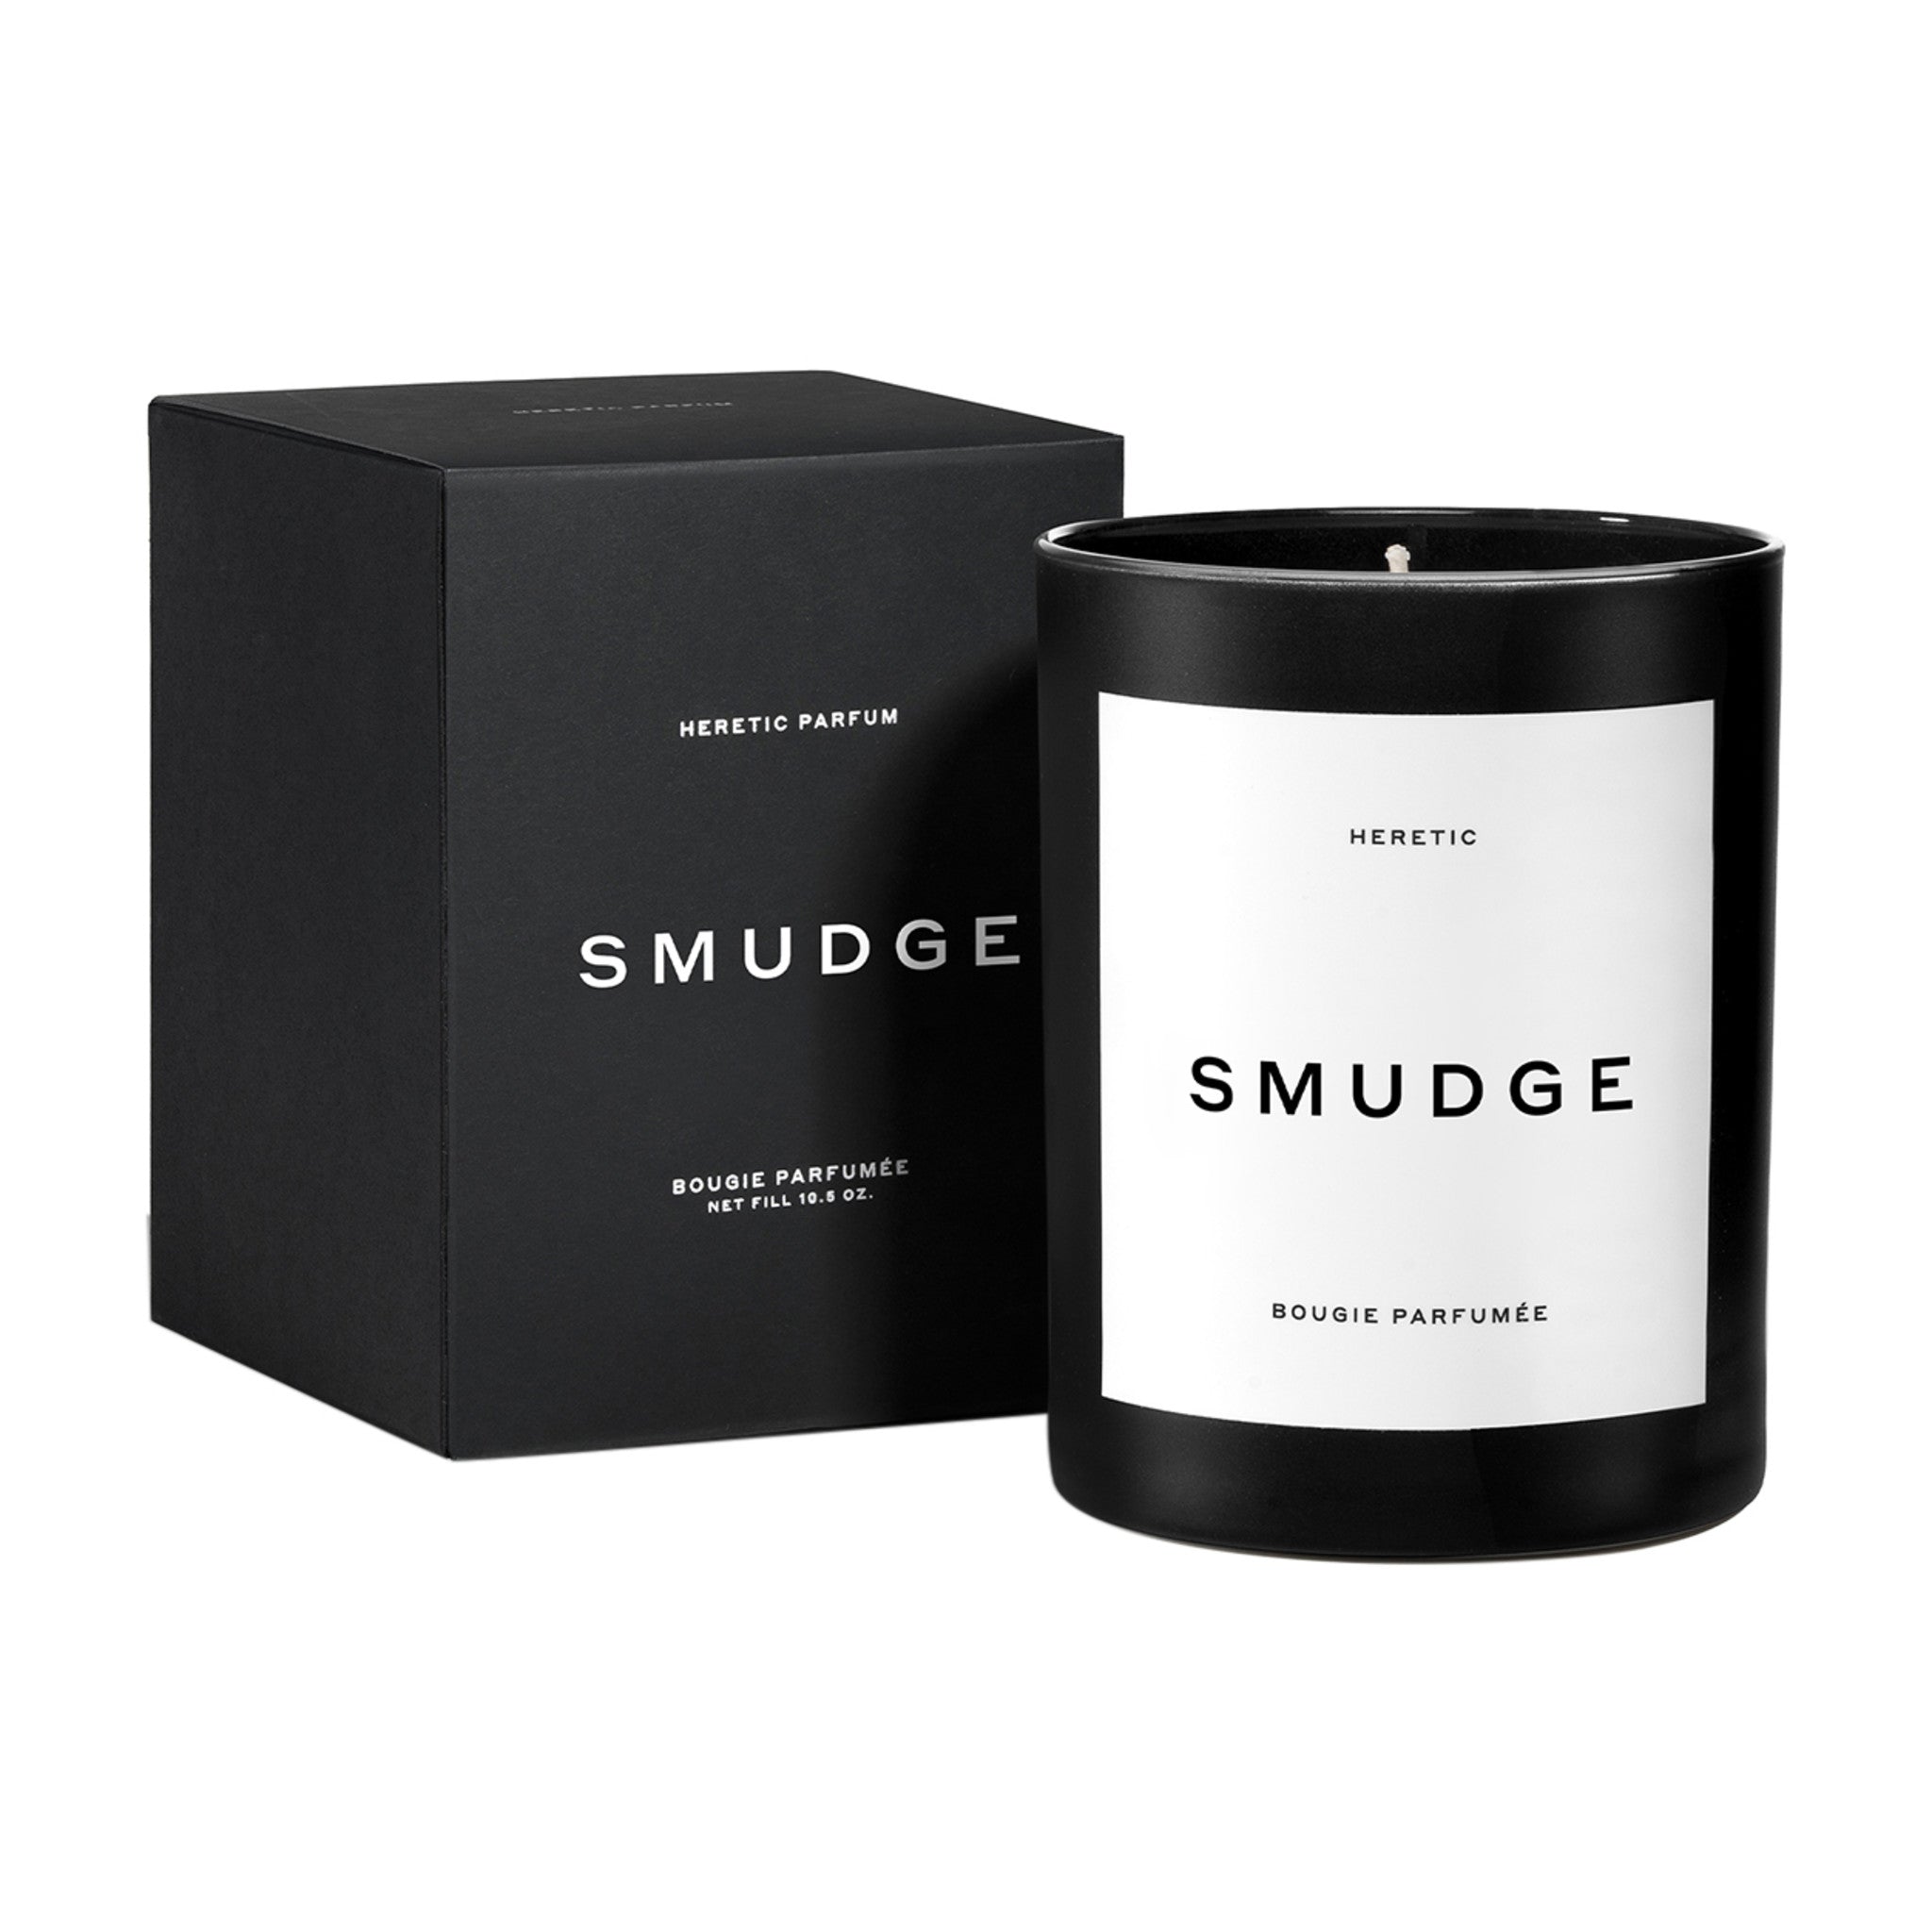 Heretic Smudge Candle main image.